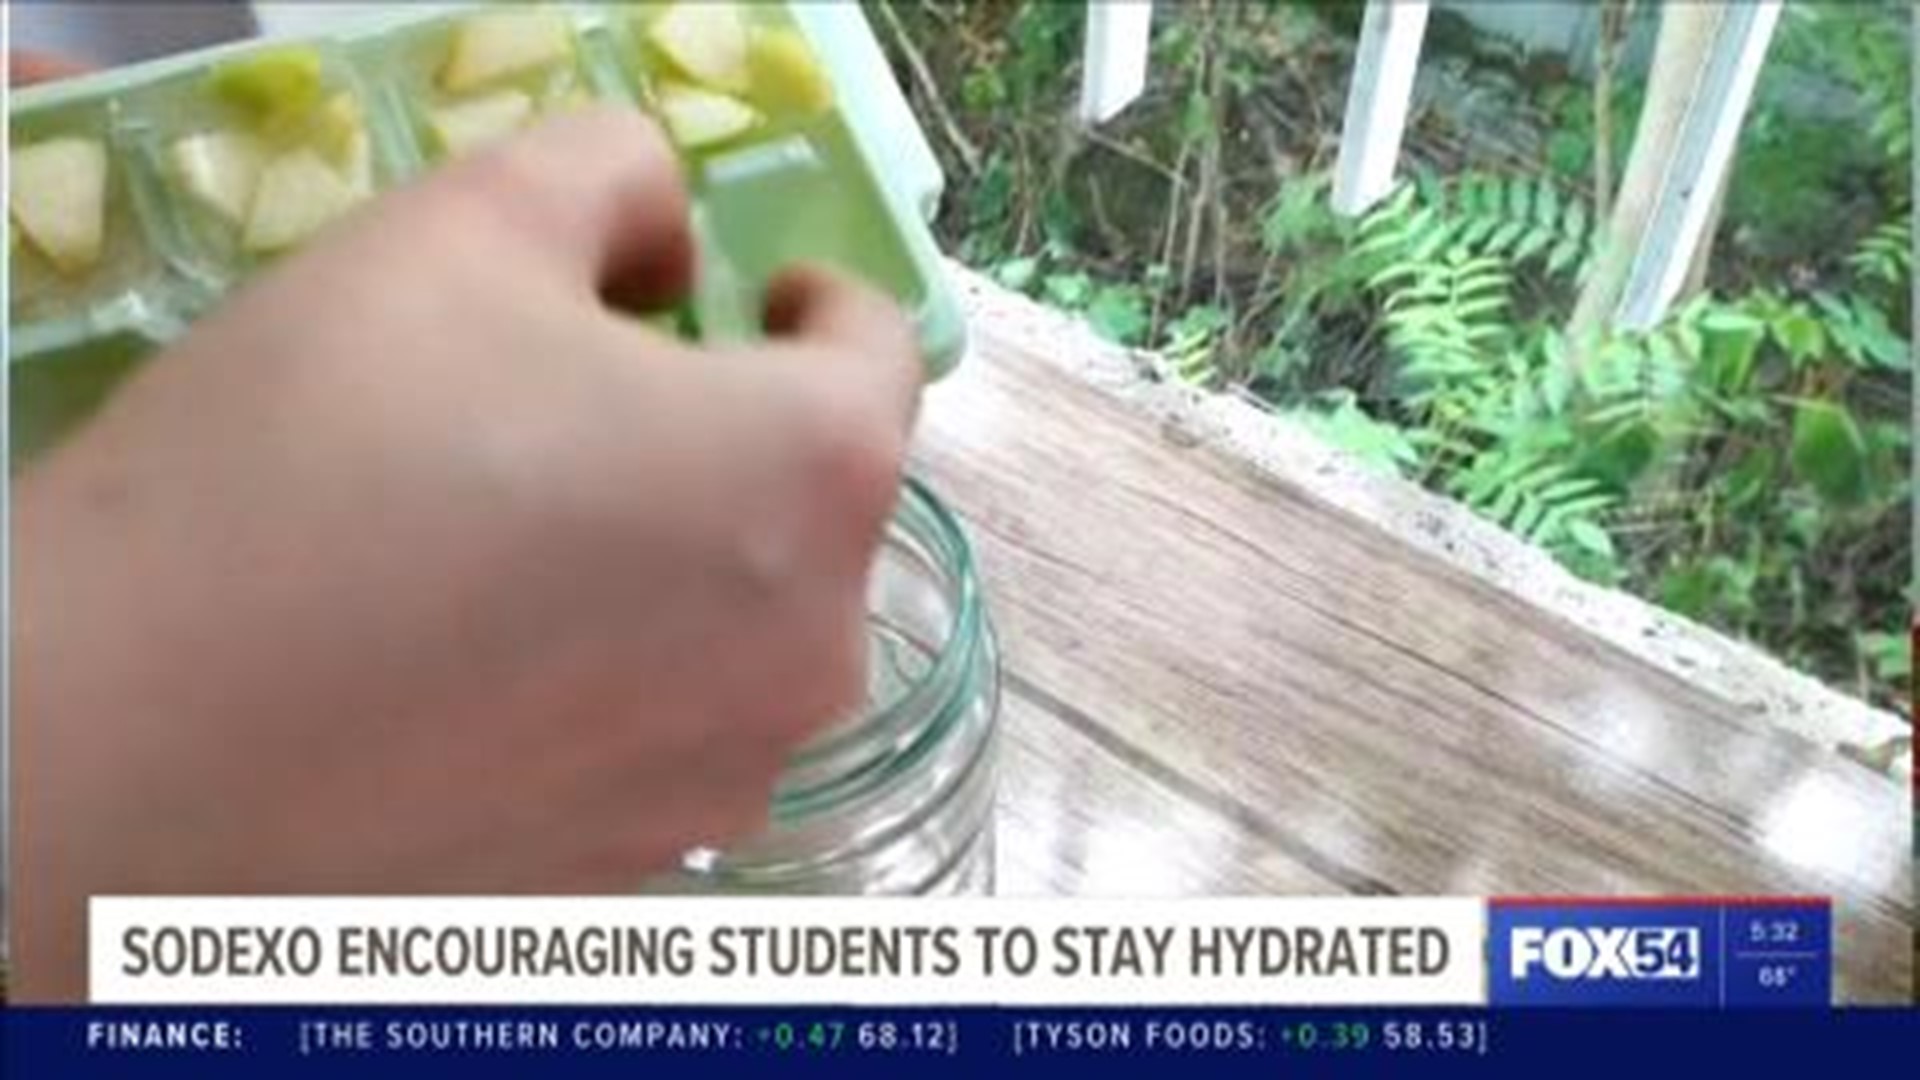 Representatives from Sodexo explain how to change the taste of water, the reason many kids say they don't drink it.